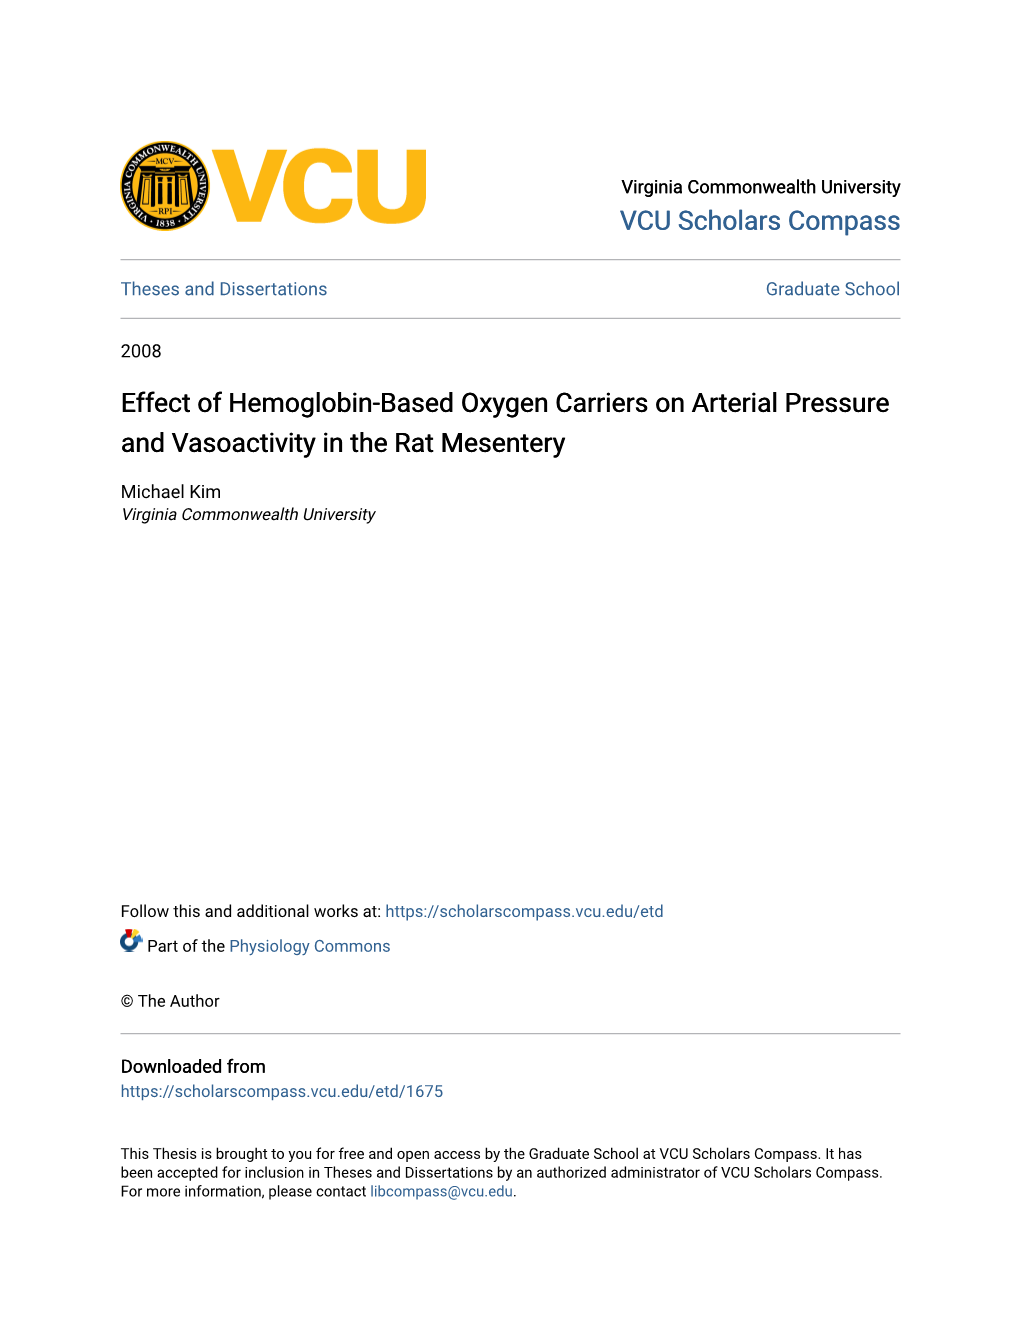 Effect of Hemoglobin-Based Oxygen Carriers on Arterial Pressure and Vasoactivity in the Rat Mesentery